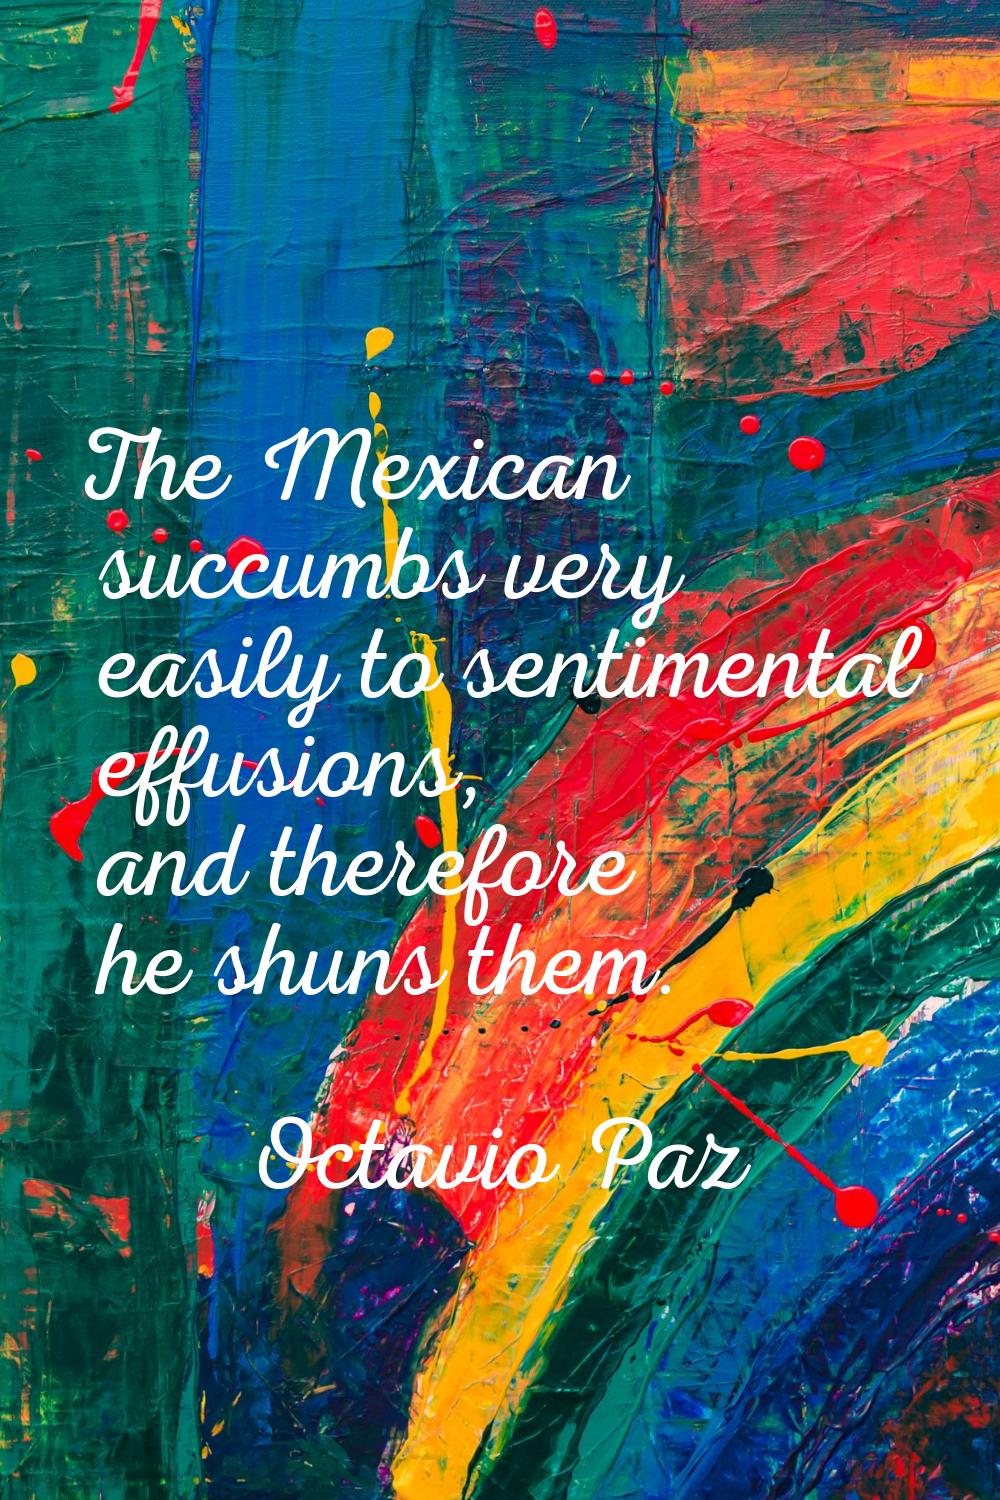 The Mexican succumbs very easily to sentimental effusions, and therefore he shuns them.